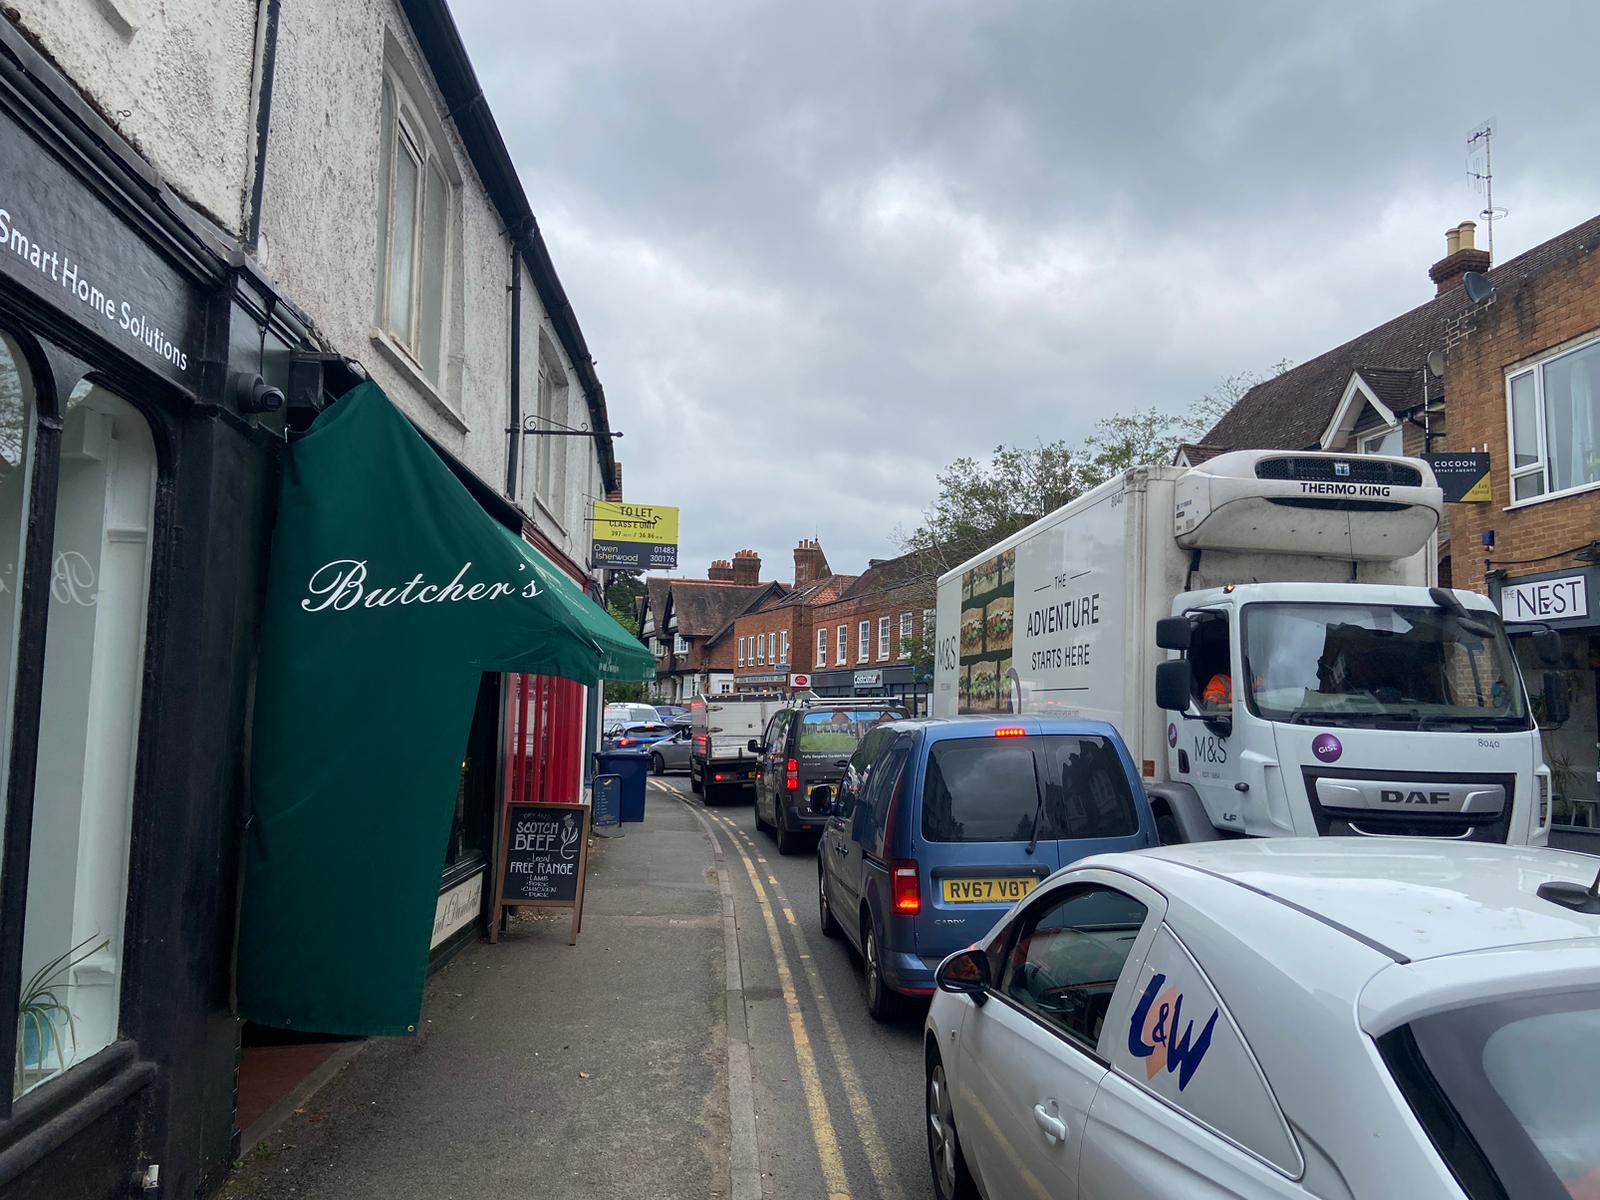 Bramley high street was gridlocked for much of the day on Friday